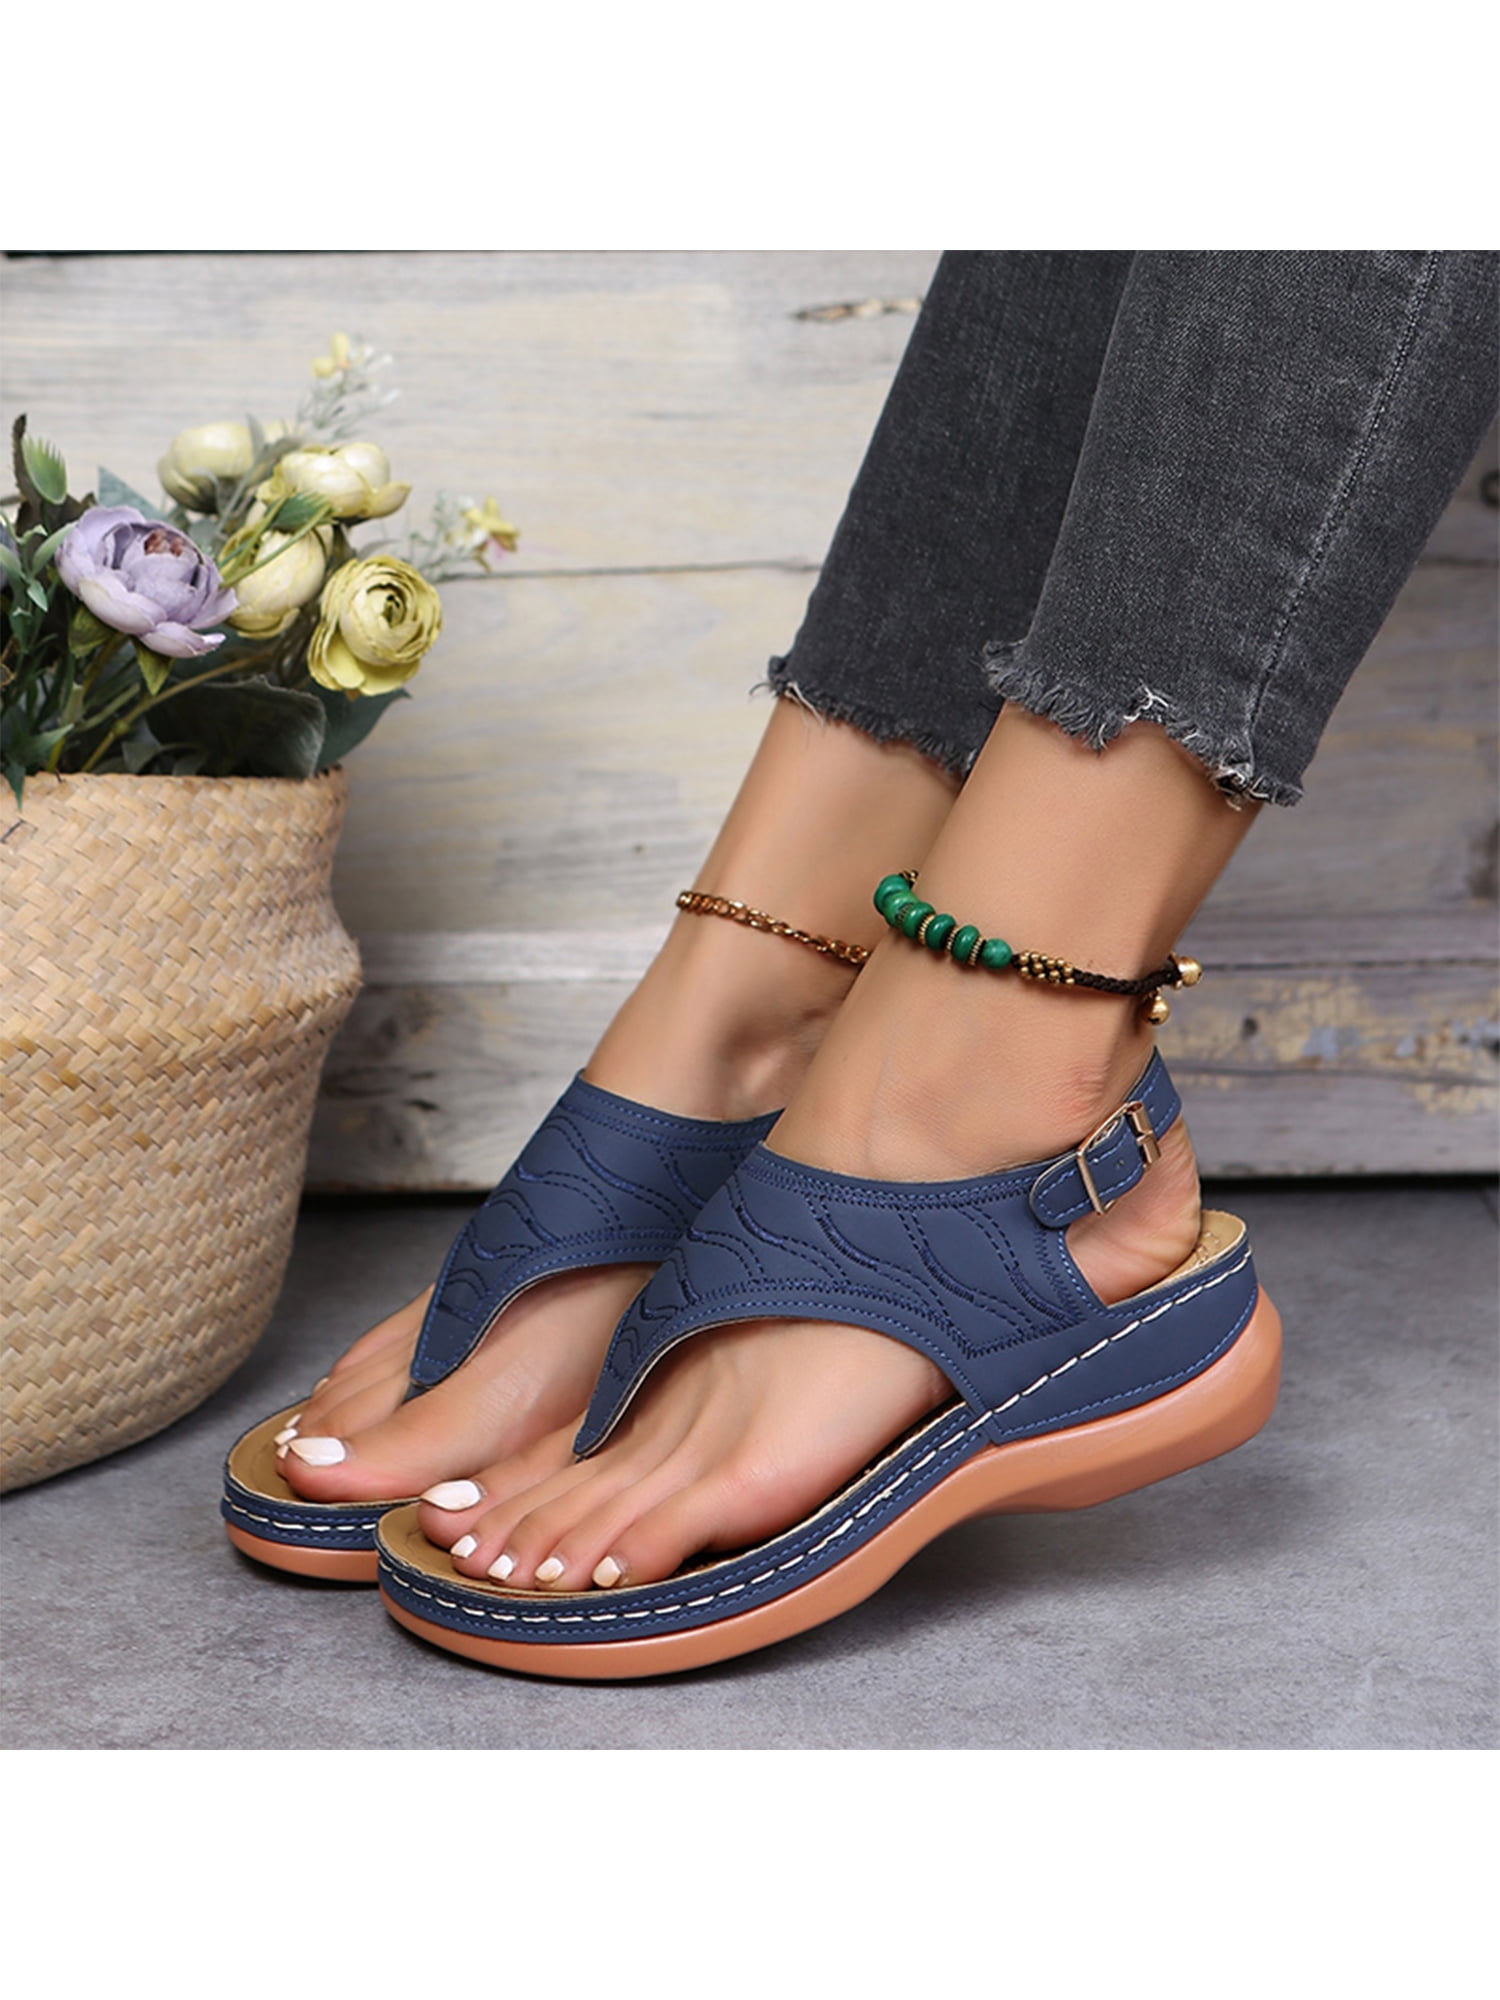 Wedges Sandals for Women Casual Wedges Slide Sandals for Women T Strap Flip Flops Sandals Summer Female Thick Bottom Casual Roman Bow Slippers